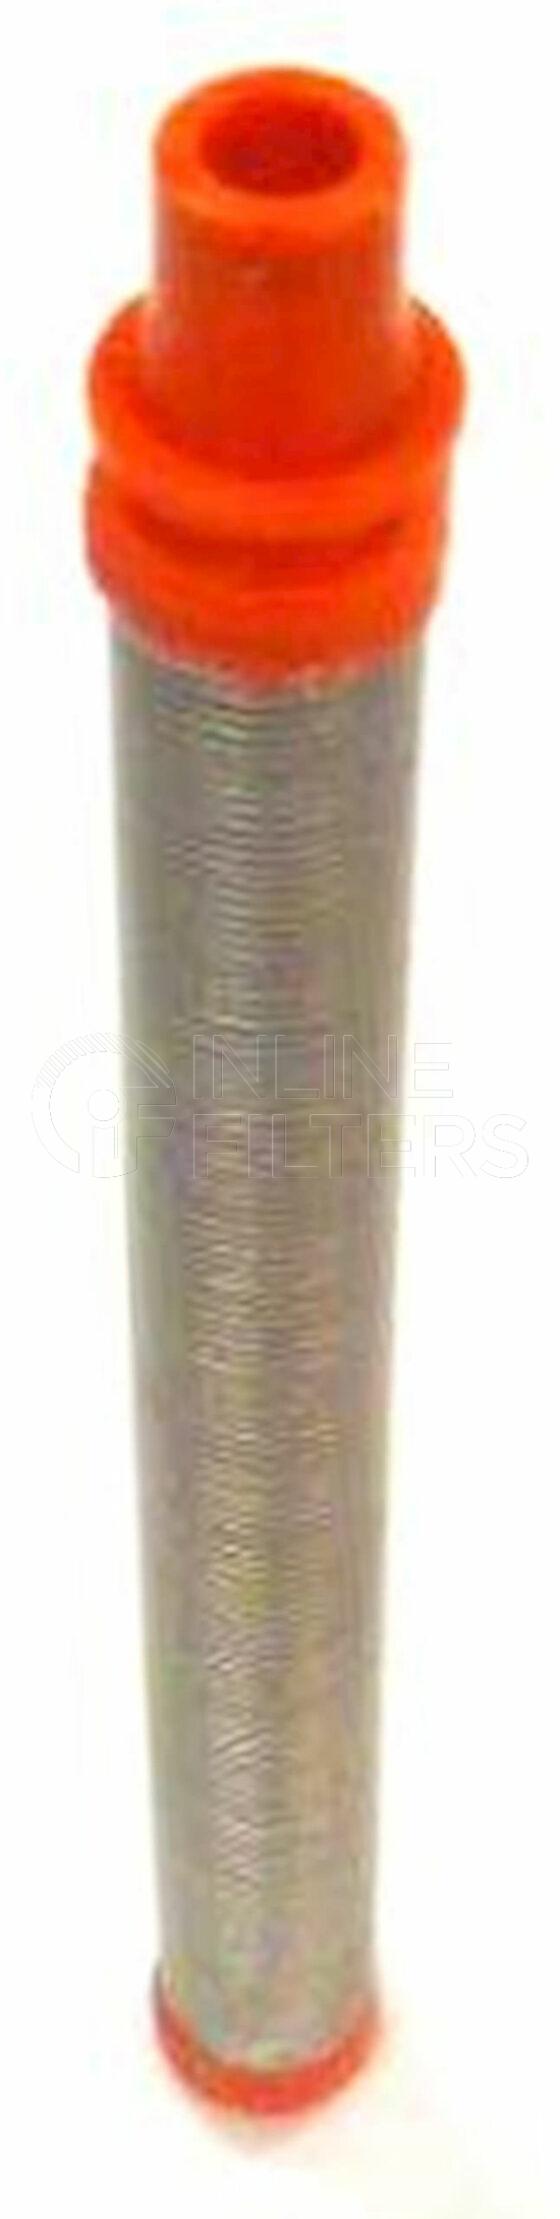 Inline FA15114. Air Filter Product – Cartridge – Flange Product Air filter product